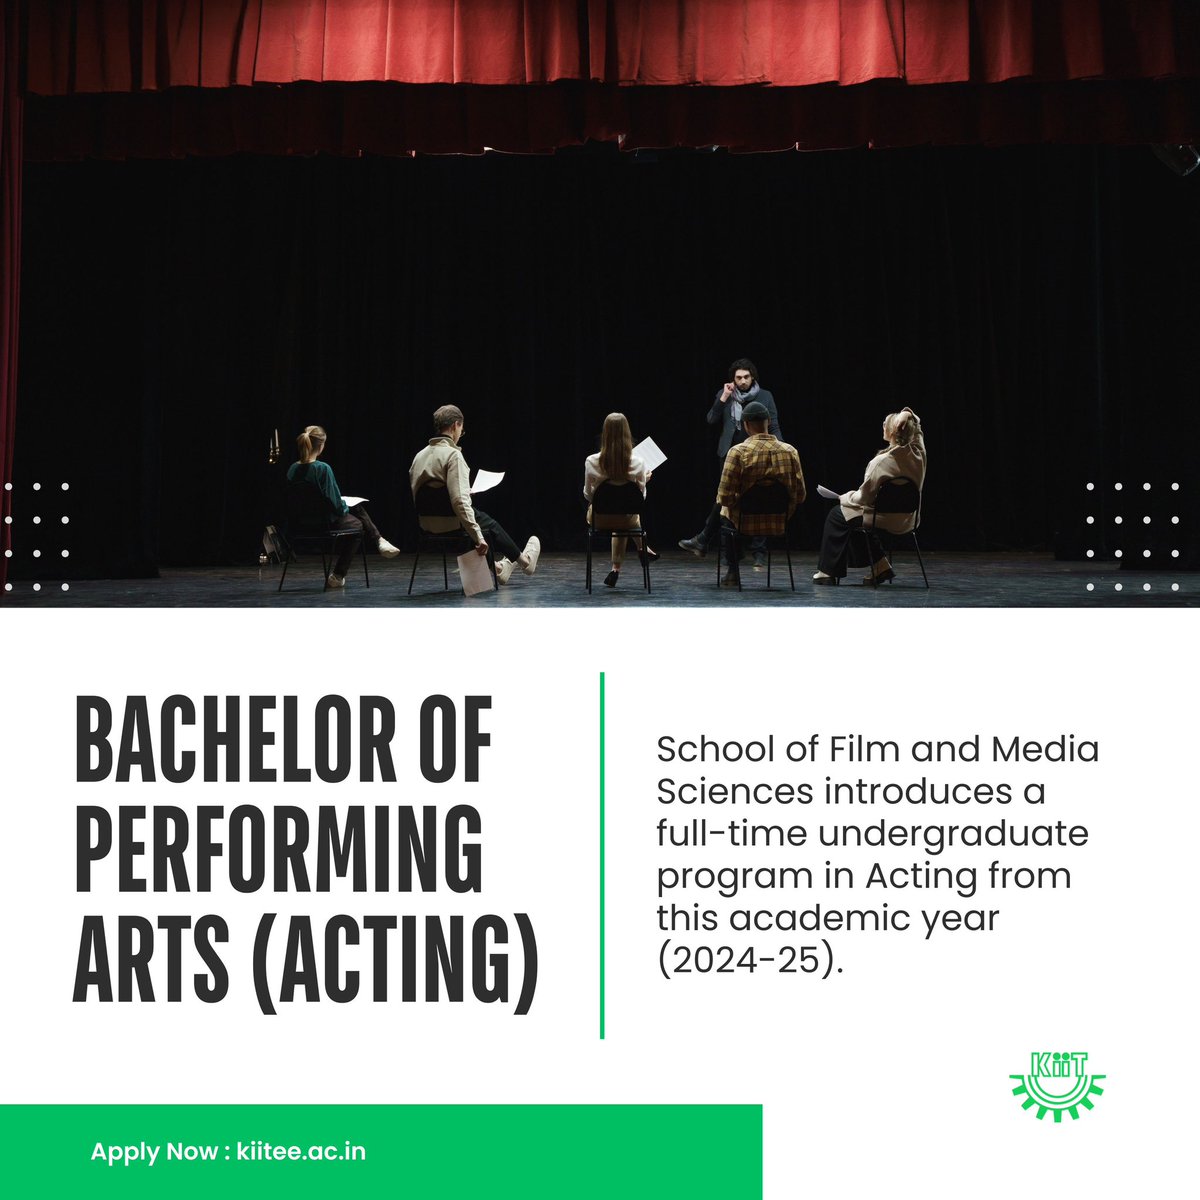 We are thrilled to announce that our School of Film and Media Sciences is launching a full-time undergraduate program in Acting this academic year 2024-25. This comprehensive program is designed to equip aspiring actors with the skills, knowledge, and experience needed to